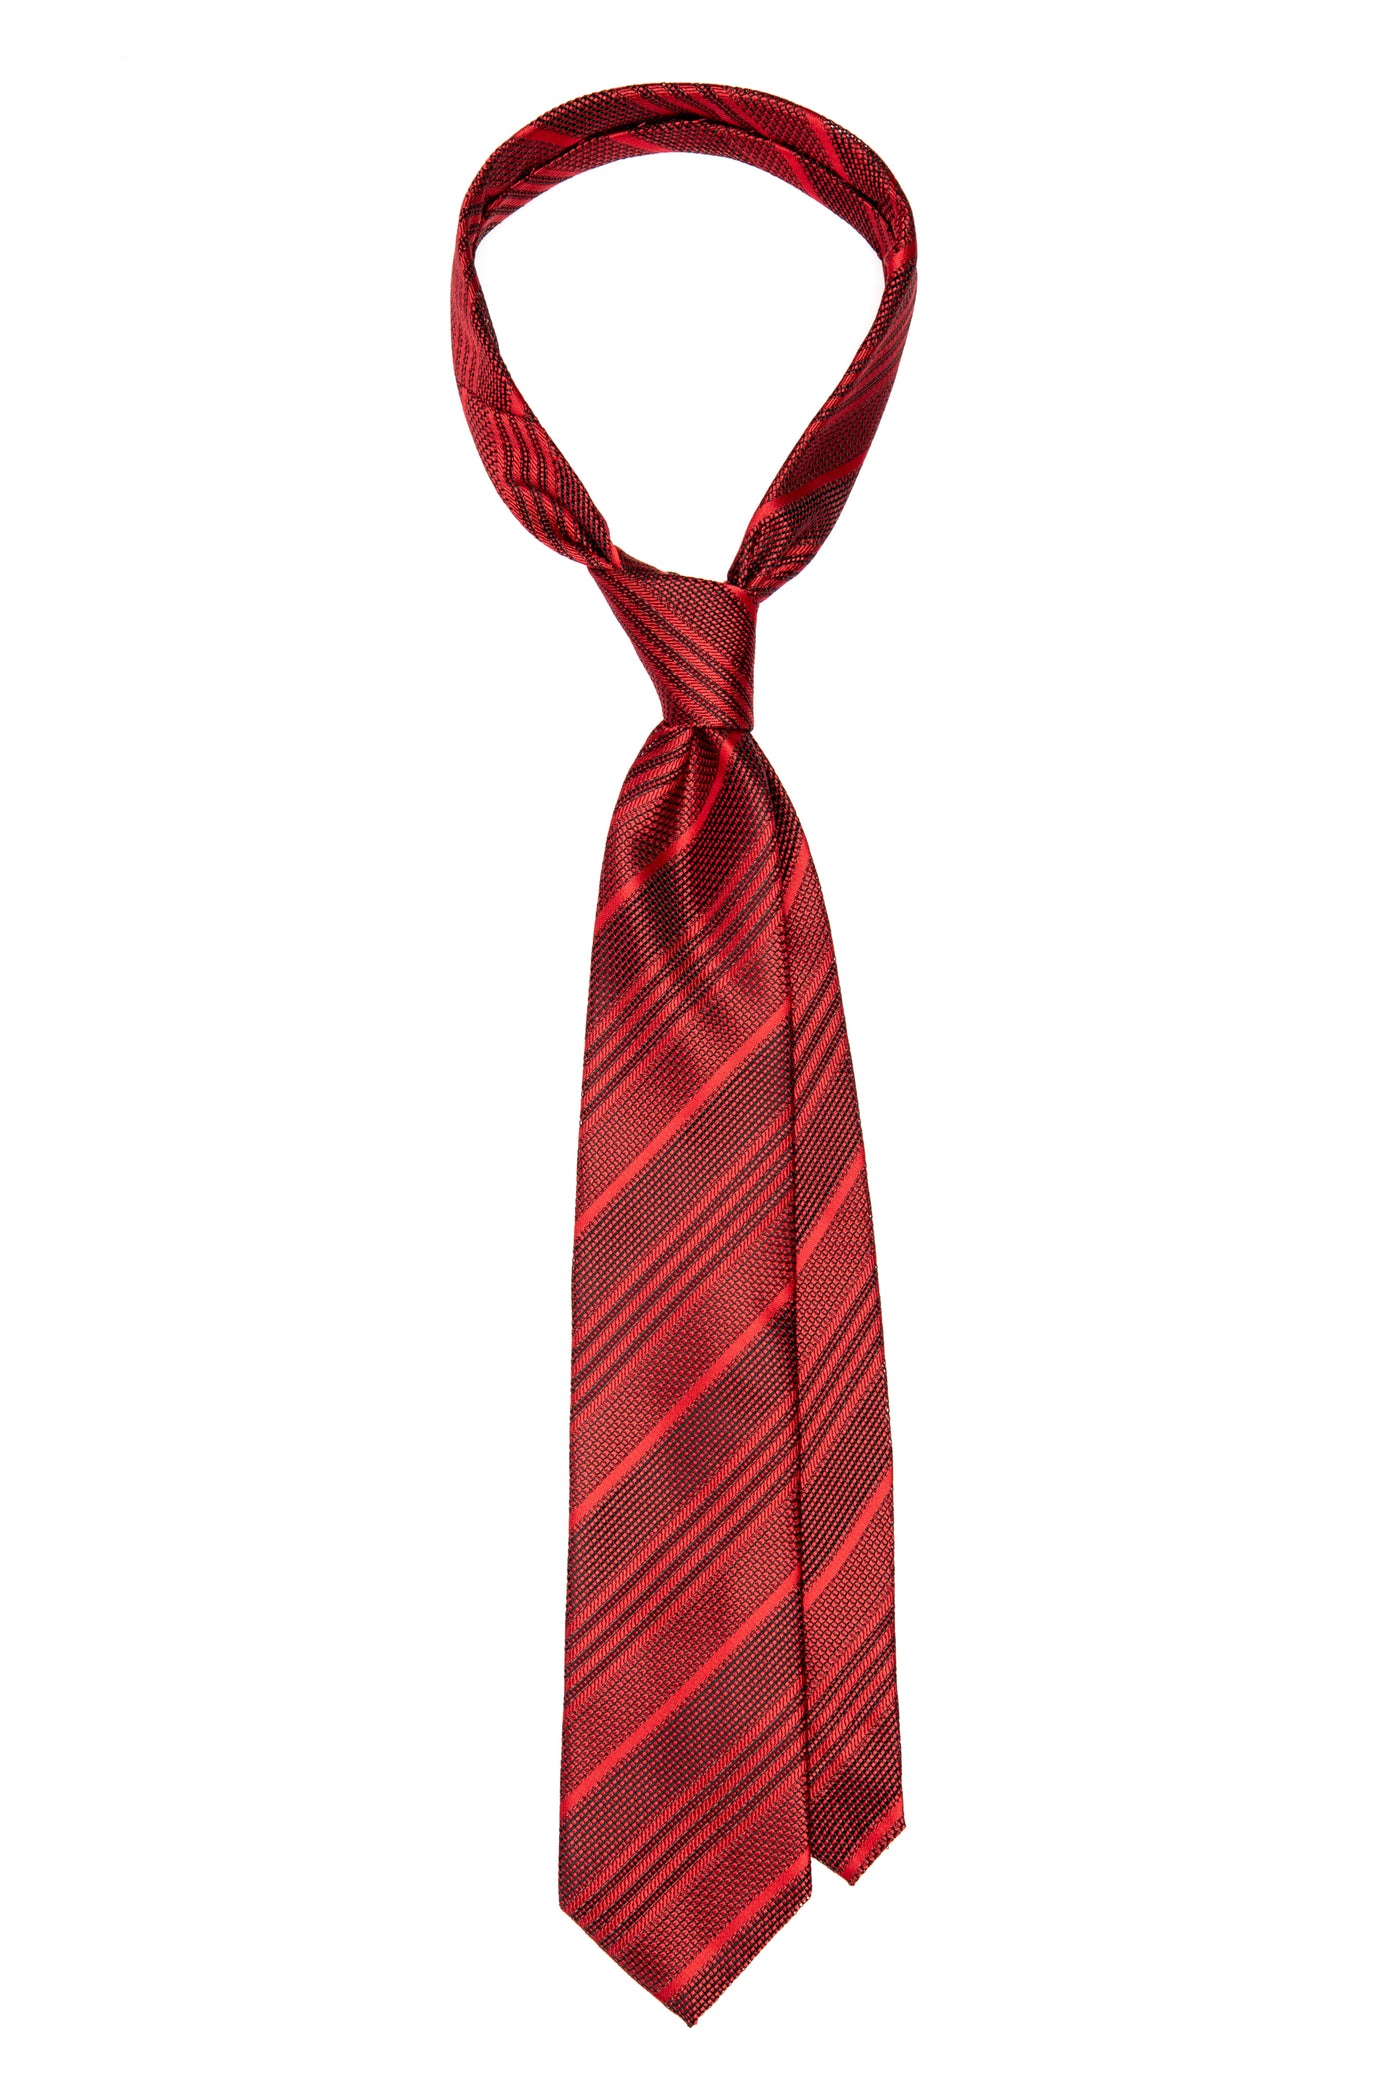 Red silk tie with texture and stripes